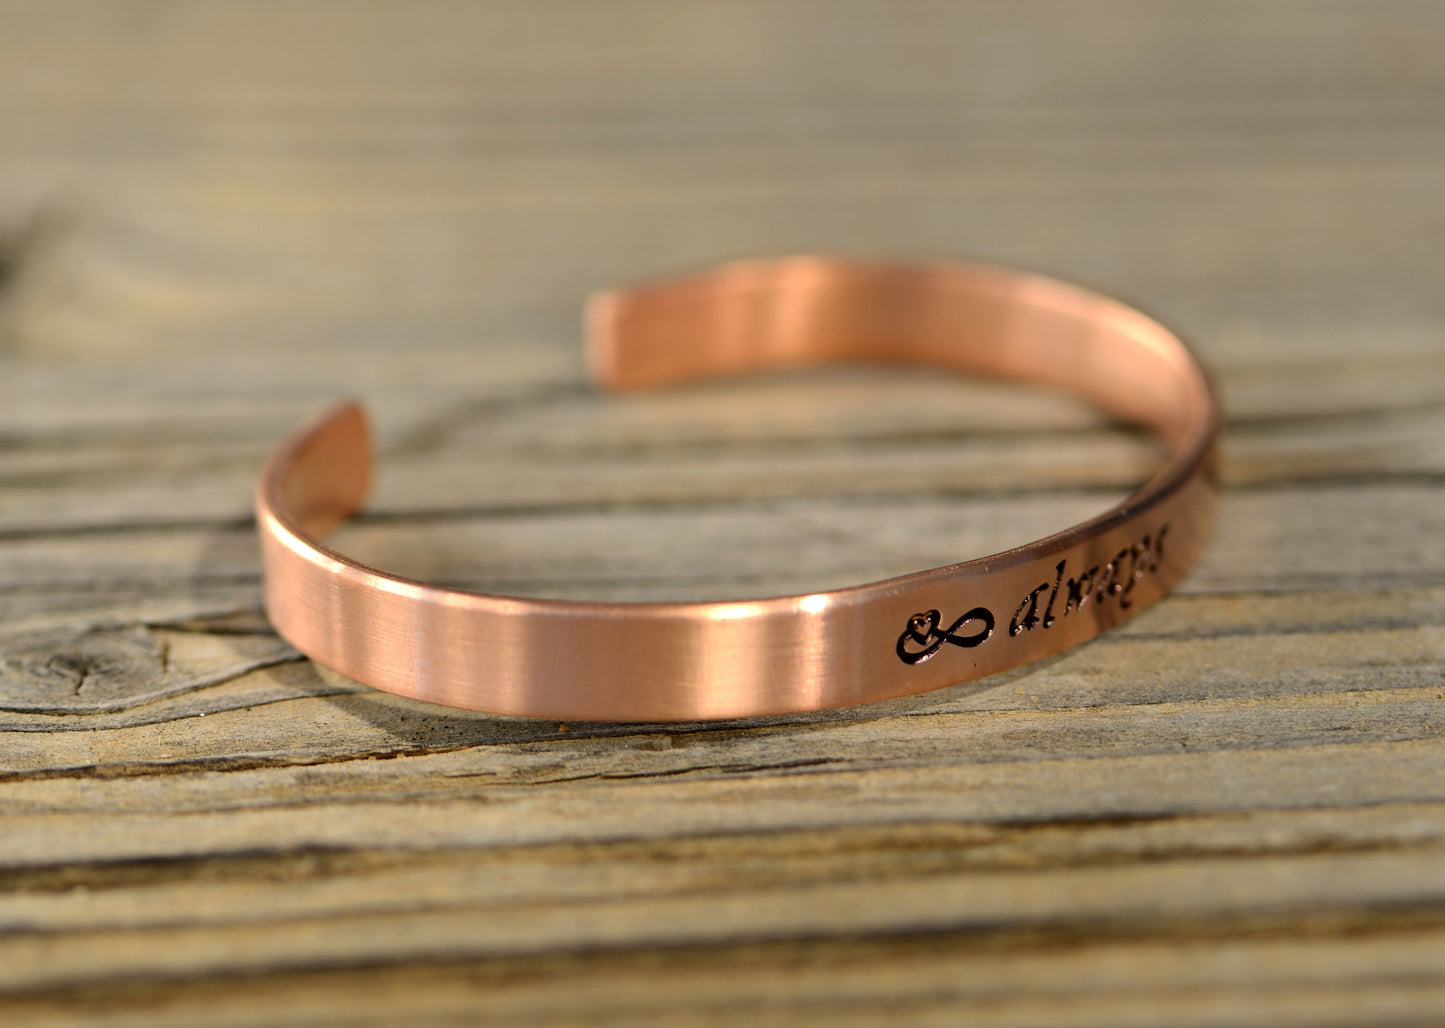 copper cuff bracelet for 7th anniversary or copper anniversary - or just because - infinity sign and always